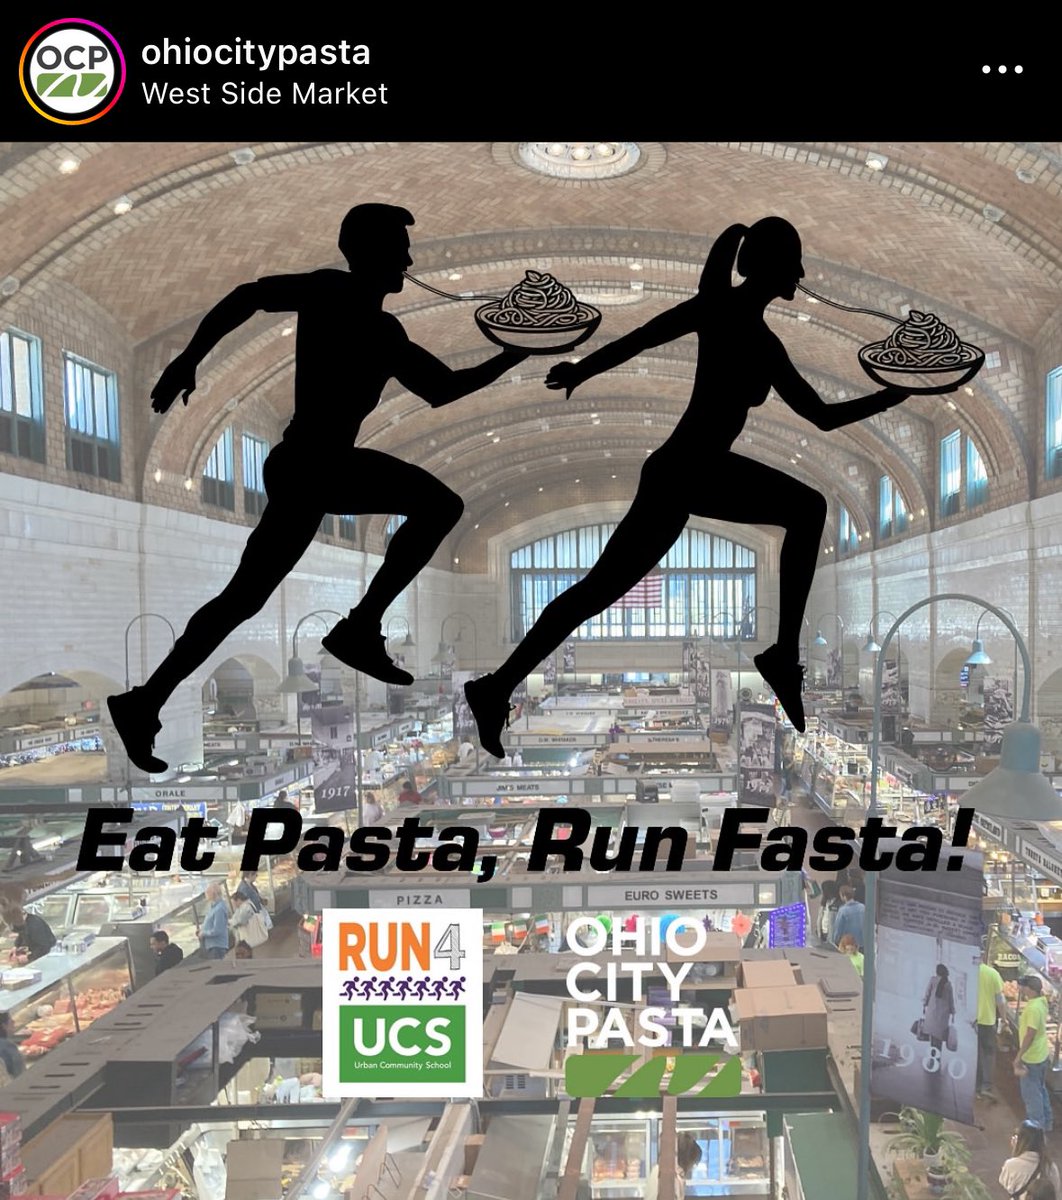 Eat Pasta, Run Fasta!

Come to the @ohiocitypasta stand at the @WestSideMarket and support a great cause! We’re here until 2:00pm! #UCSpride